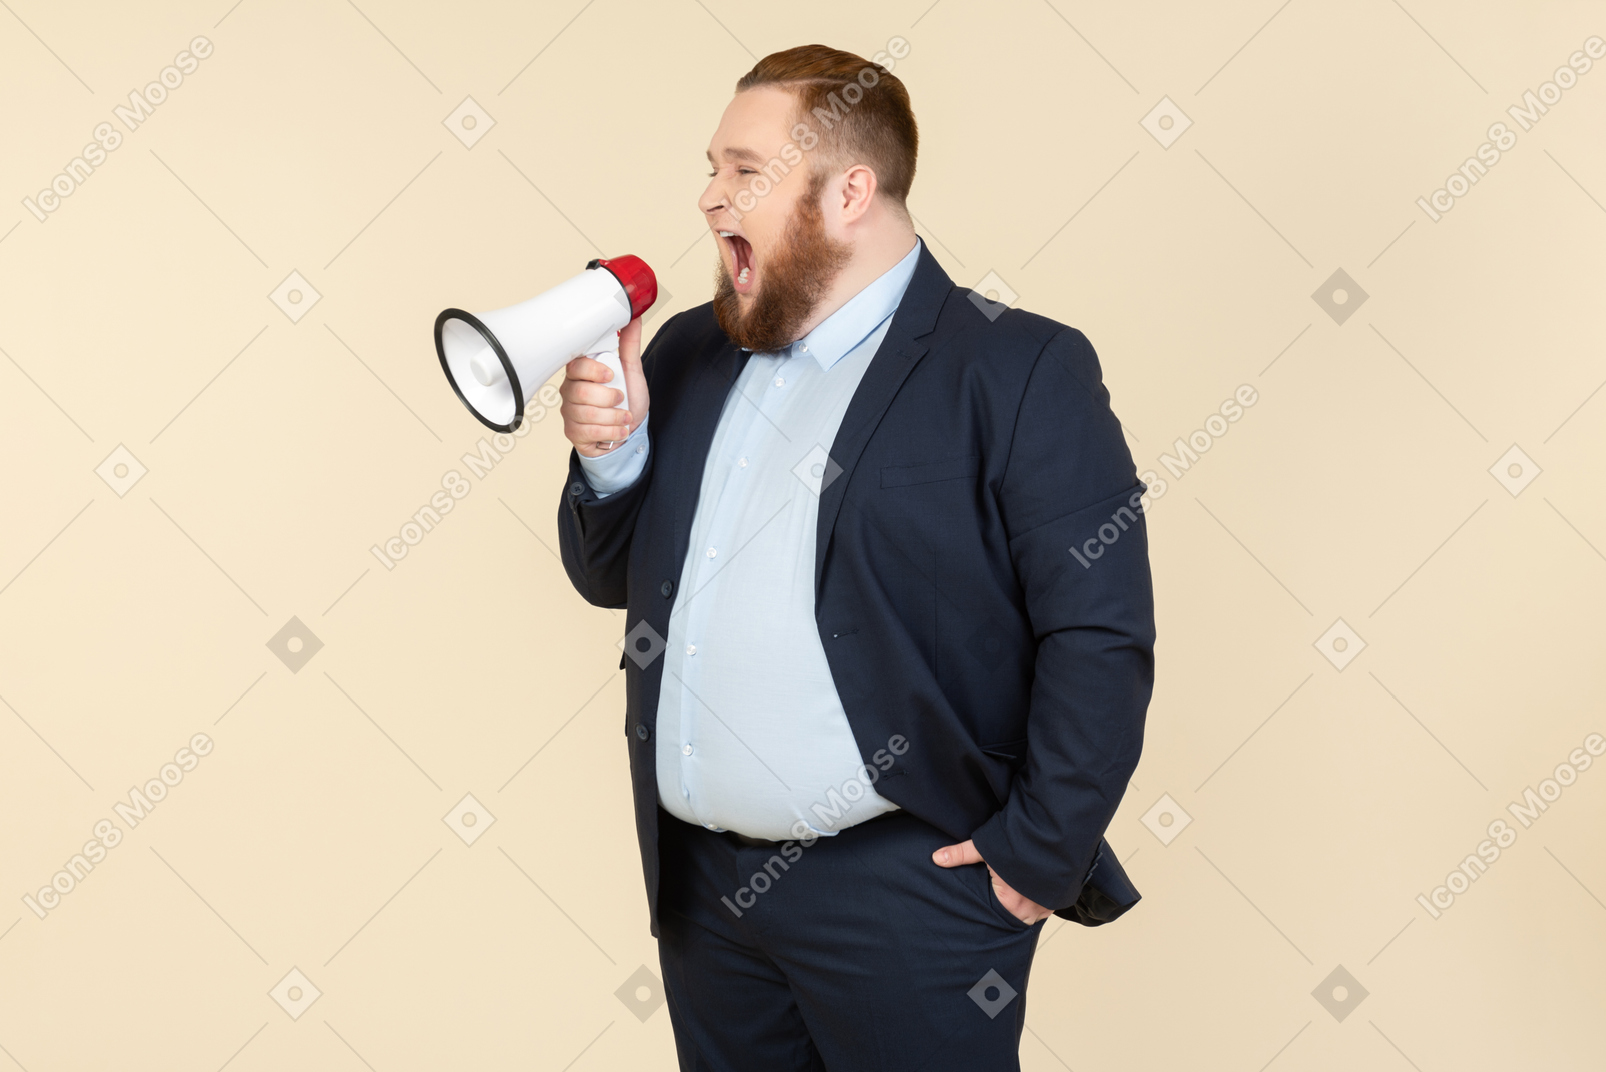 Young overweight office worker screaming using megaphone